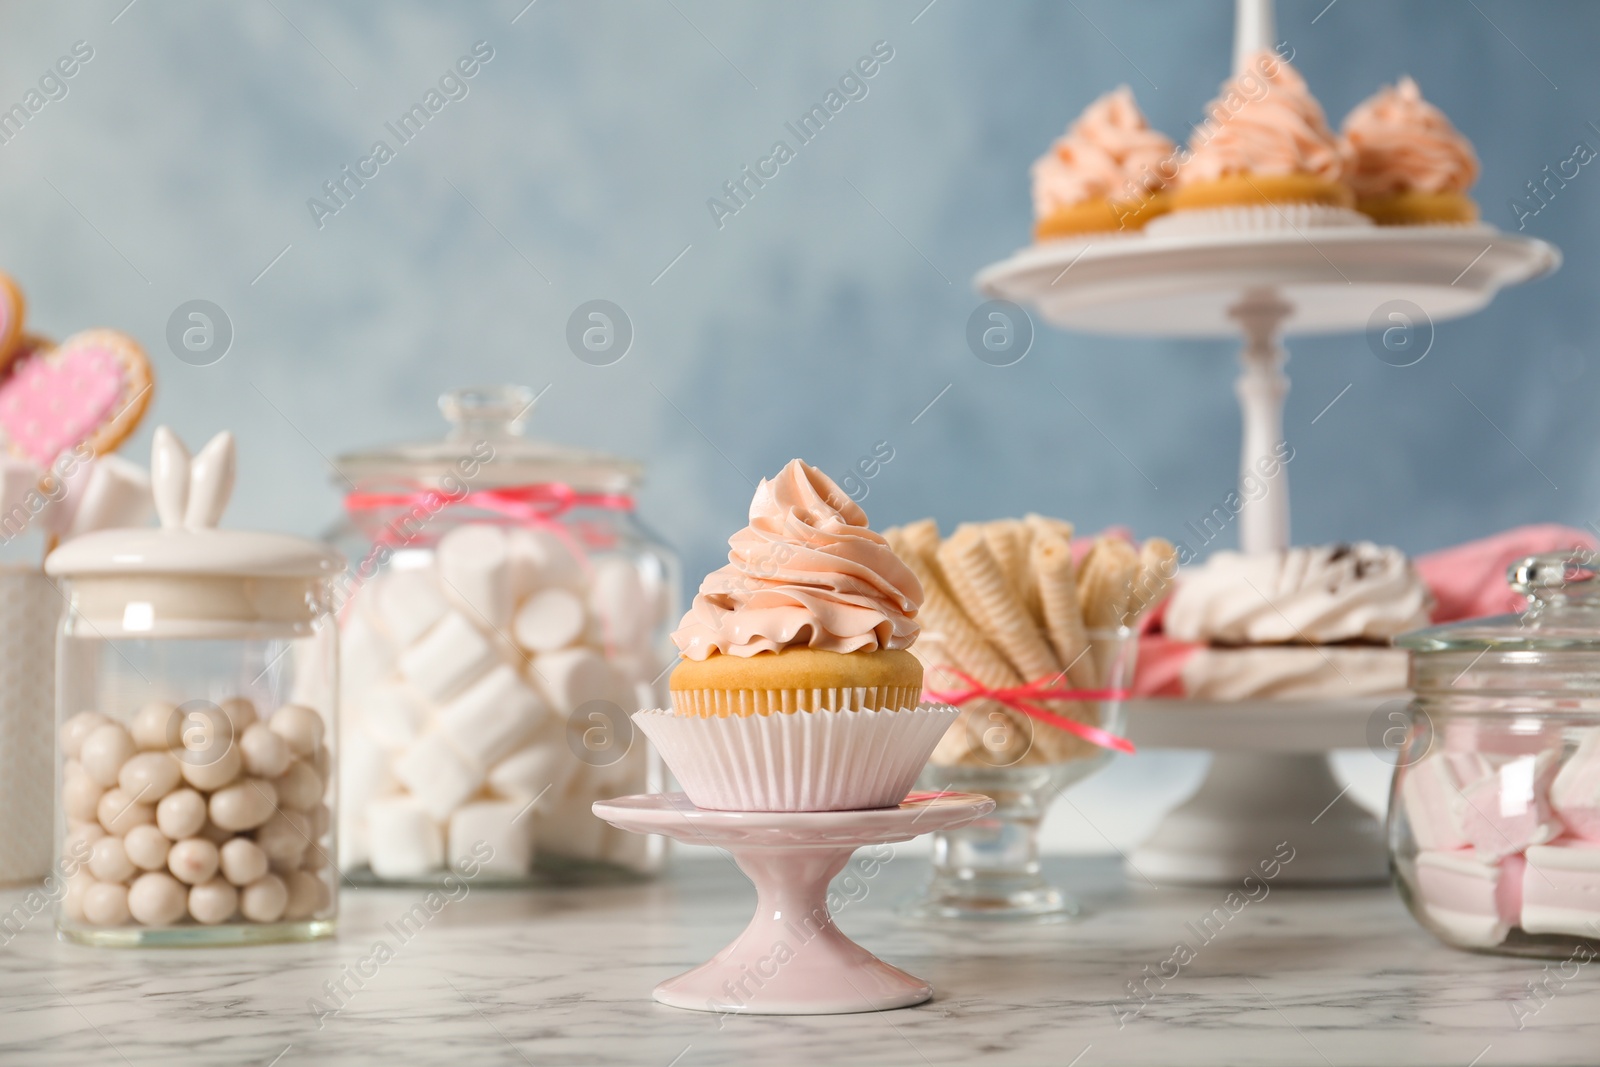 Photo of Stand with cupcake and other sweets on white marble table. Candy bar